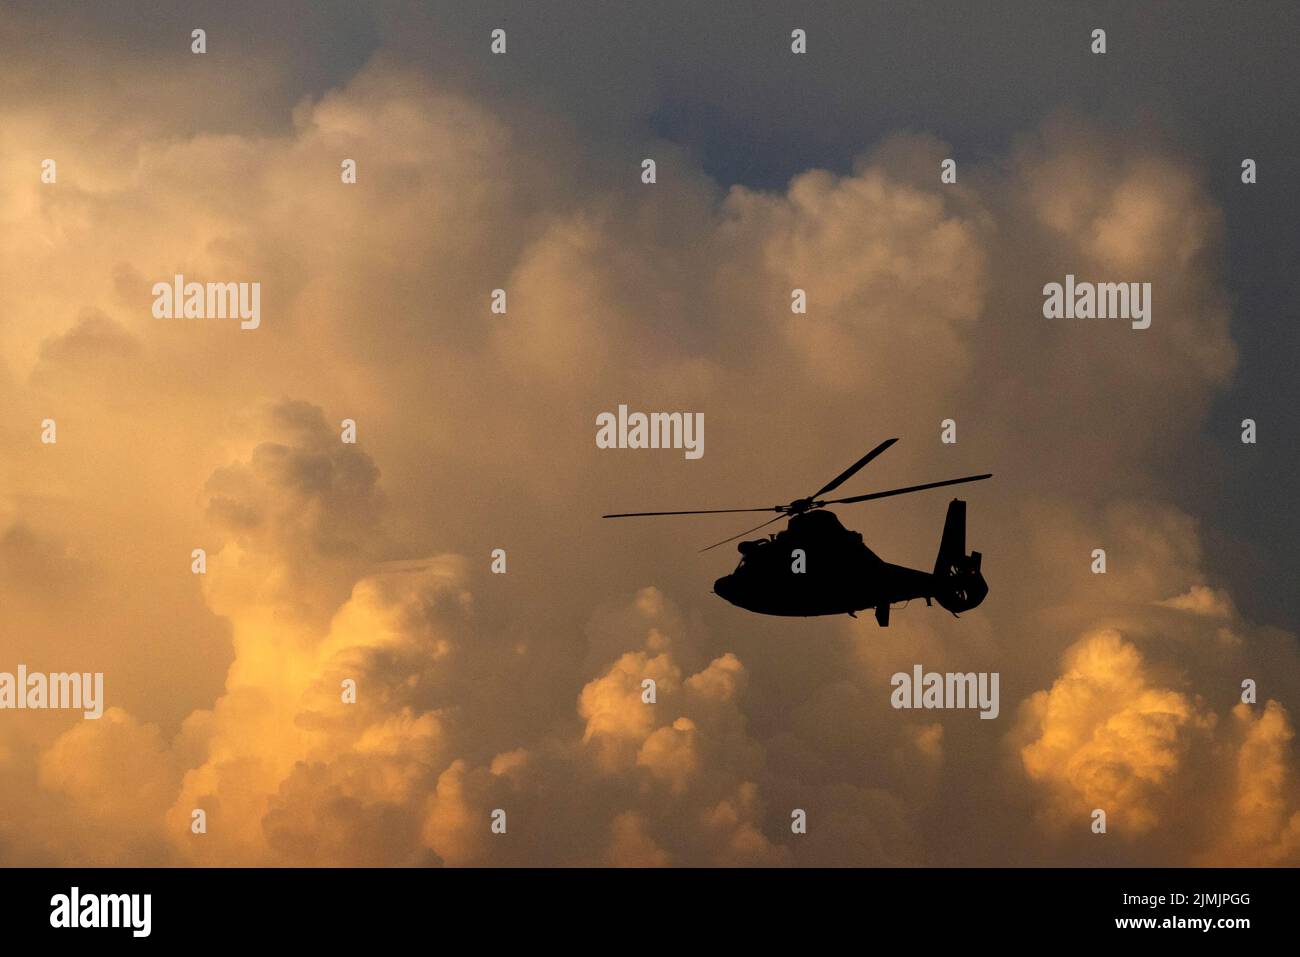 A U.S. Coast Guard helicopter in silhouette against a cloudy sky in a composite image. Stock Photo